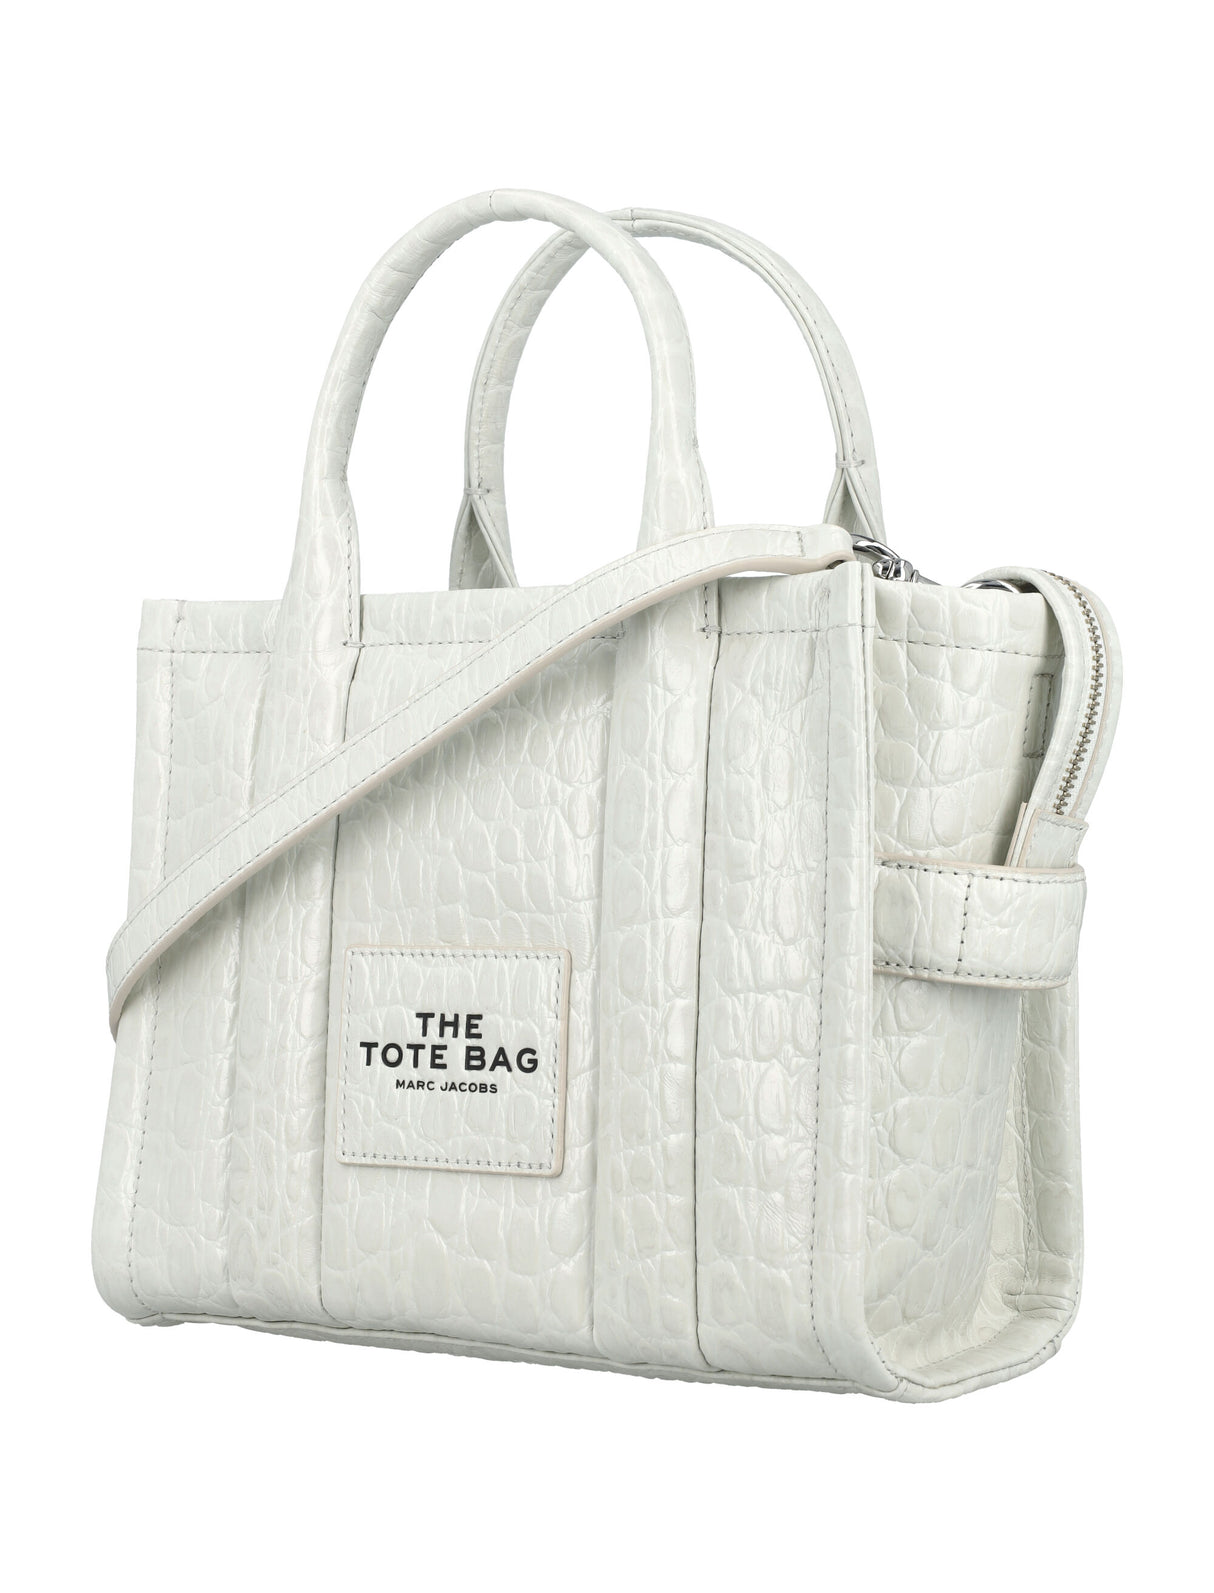 MARC JACOBS White Mini Croc-Embossed Leather Tote Handbag with Adjustable Strap